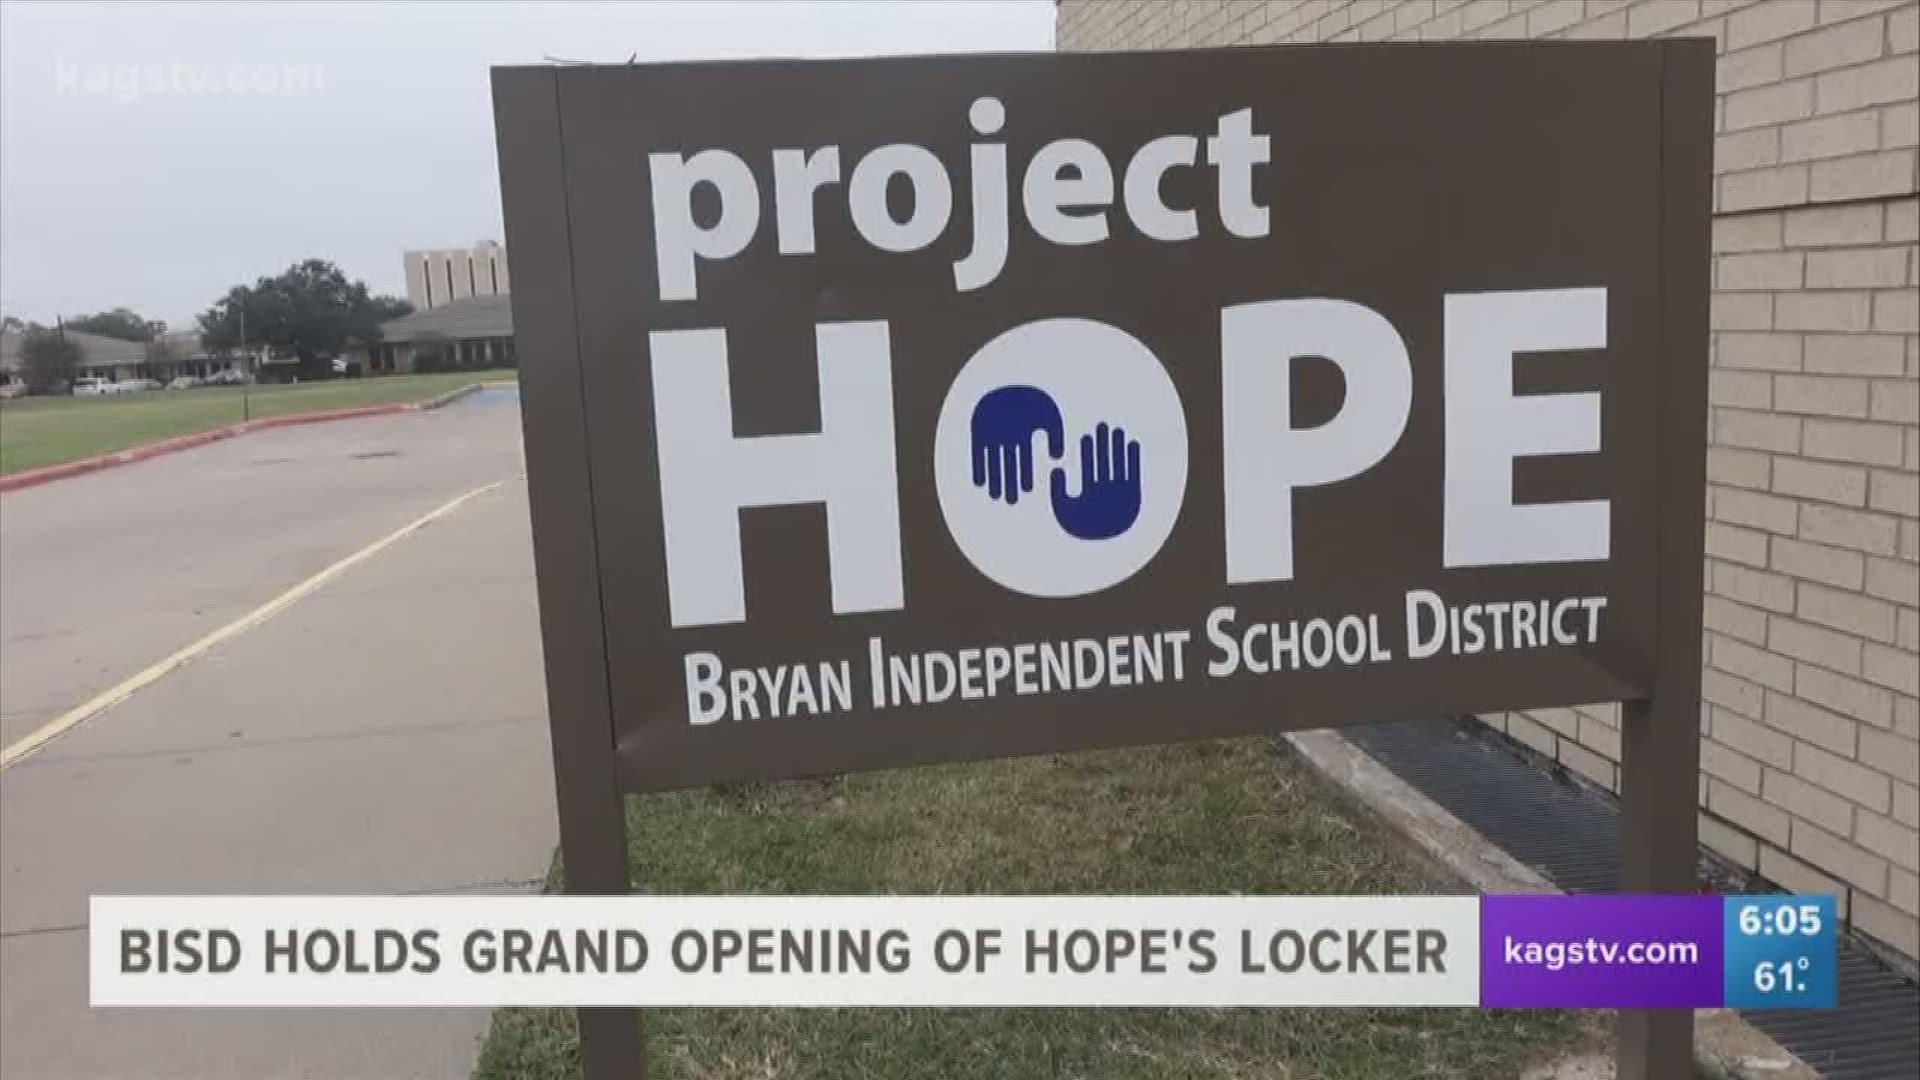 This morning, Bryan ISD celebrated the grand opening of Hope's Locker, a free store where the district's students and their families can shop for new and gently used clothing and other items.